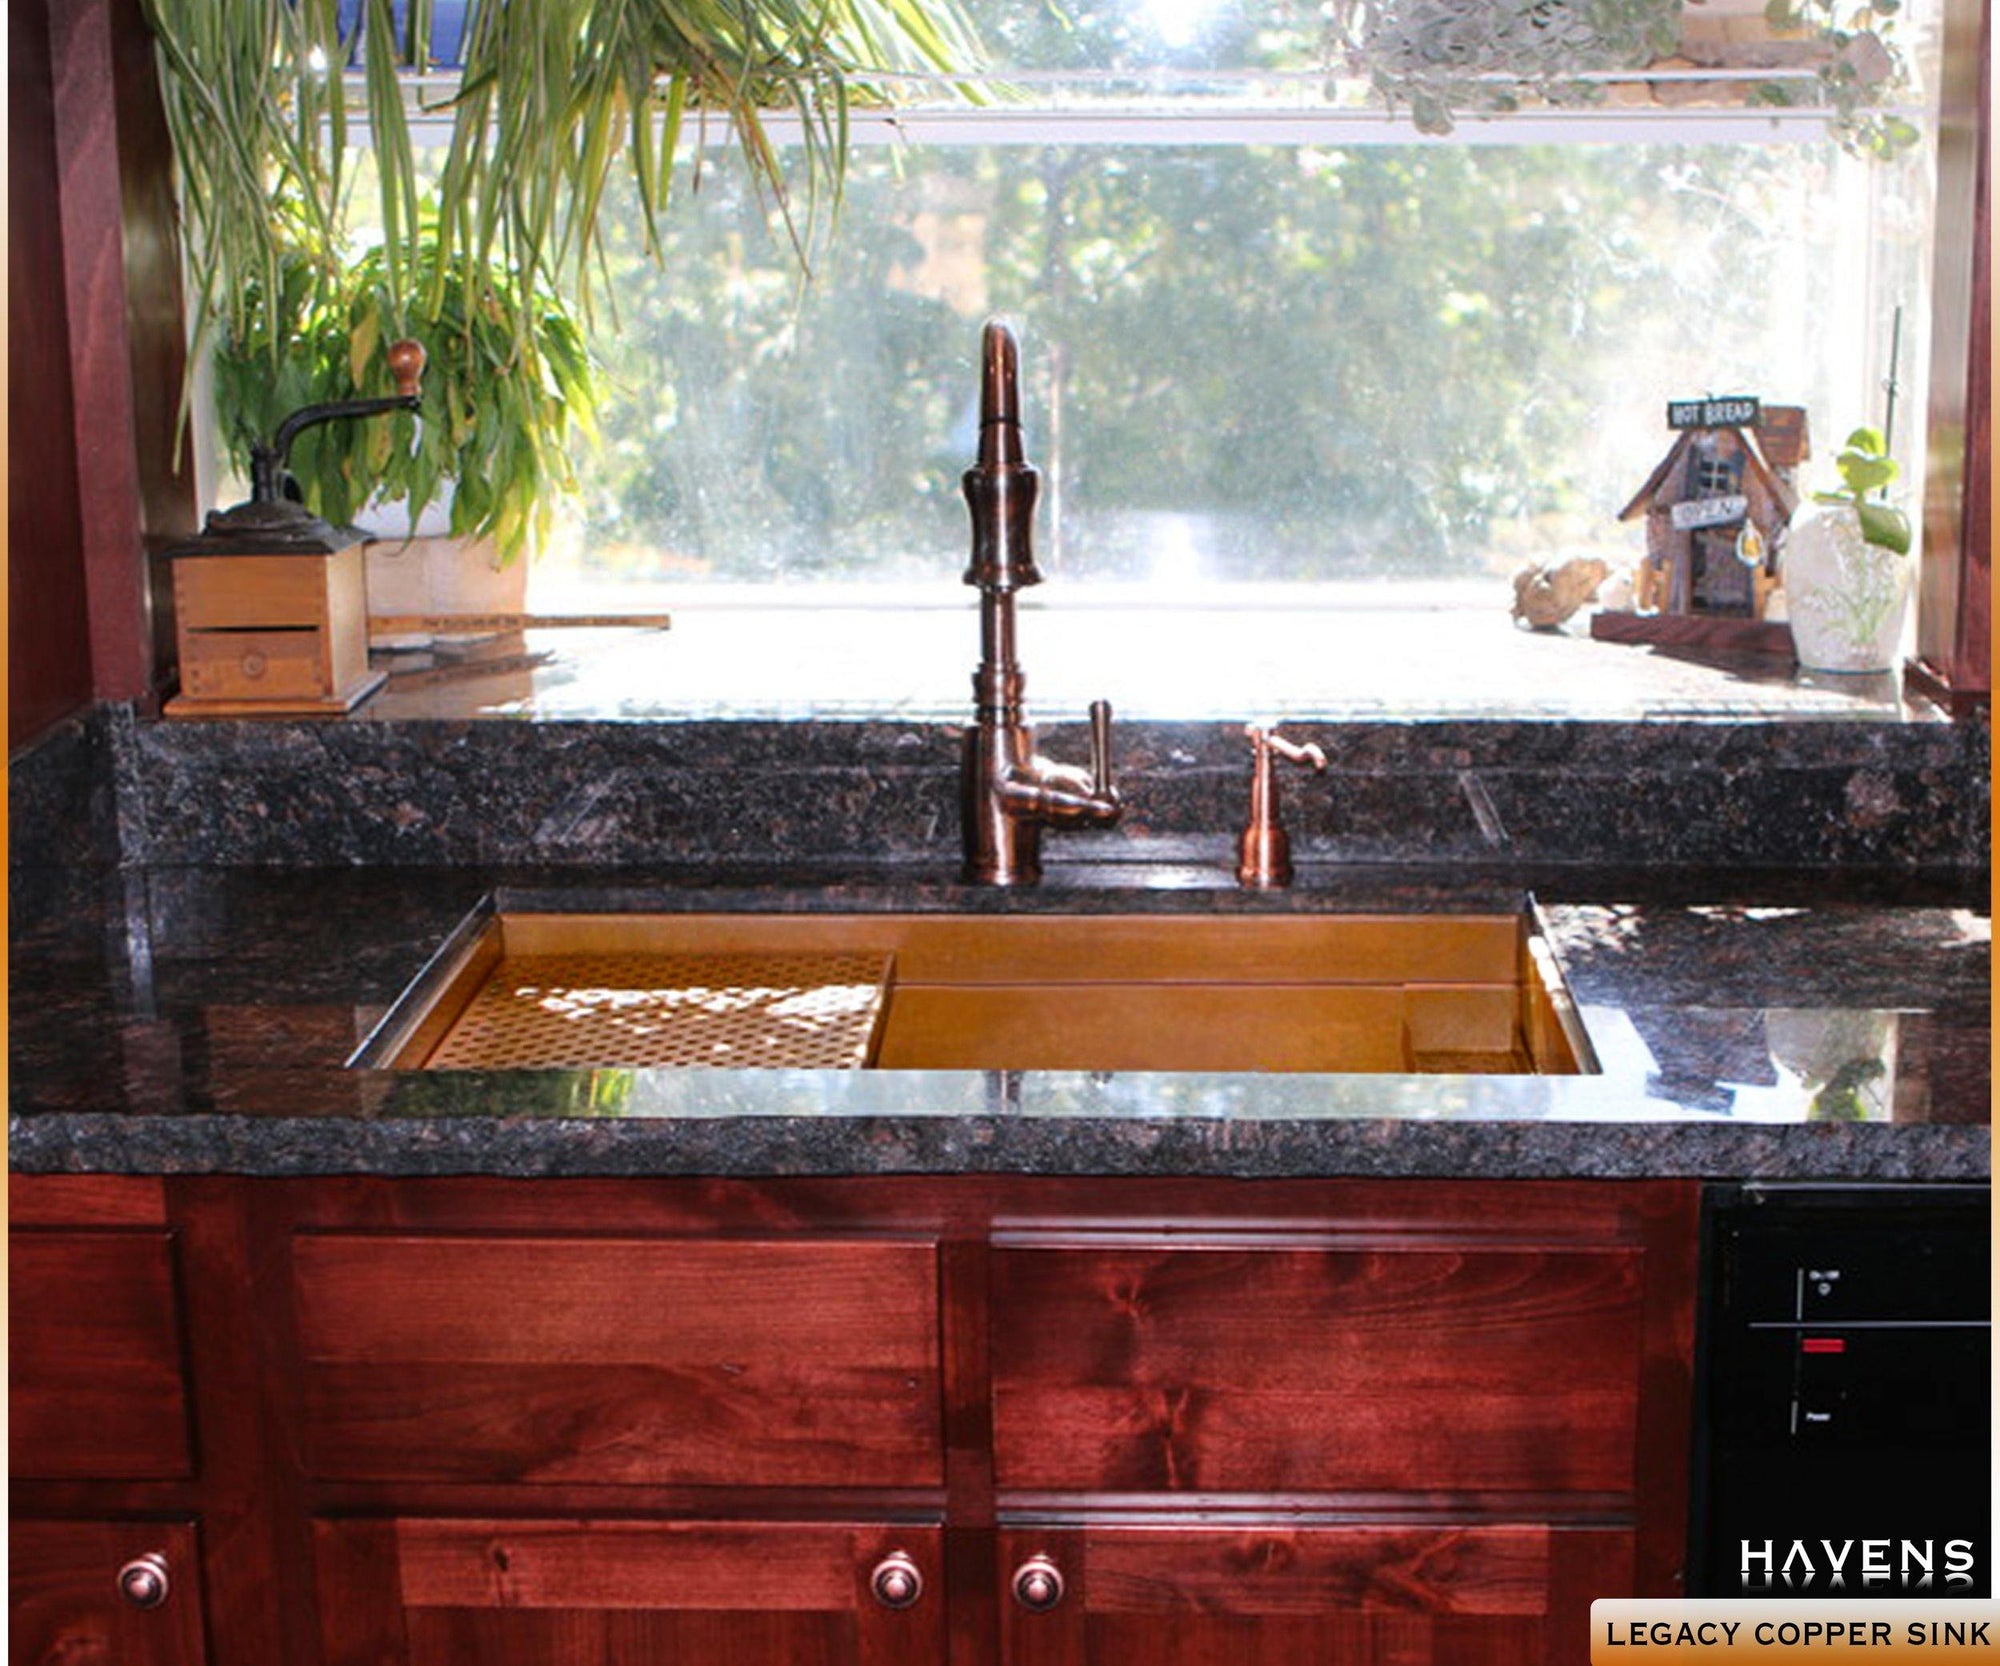 Undermount Legacy copper kitchen sink, USA handcrafted by Havens.